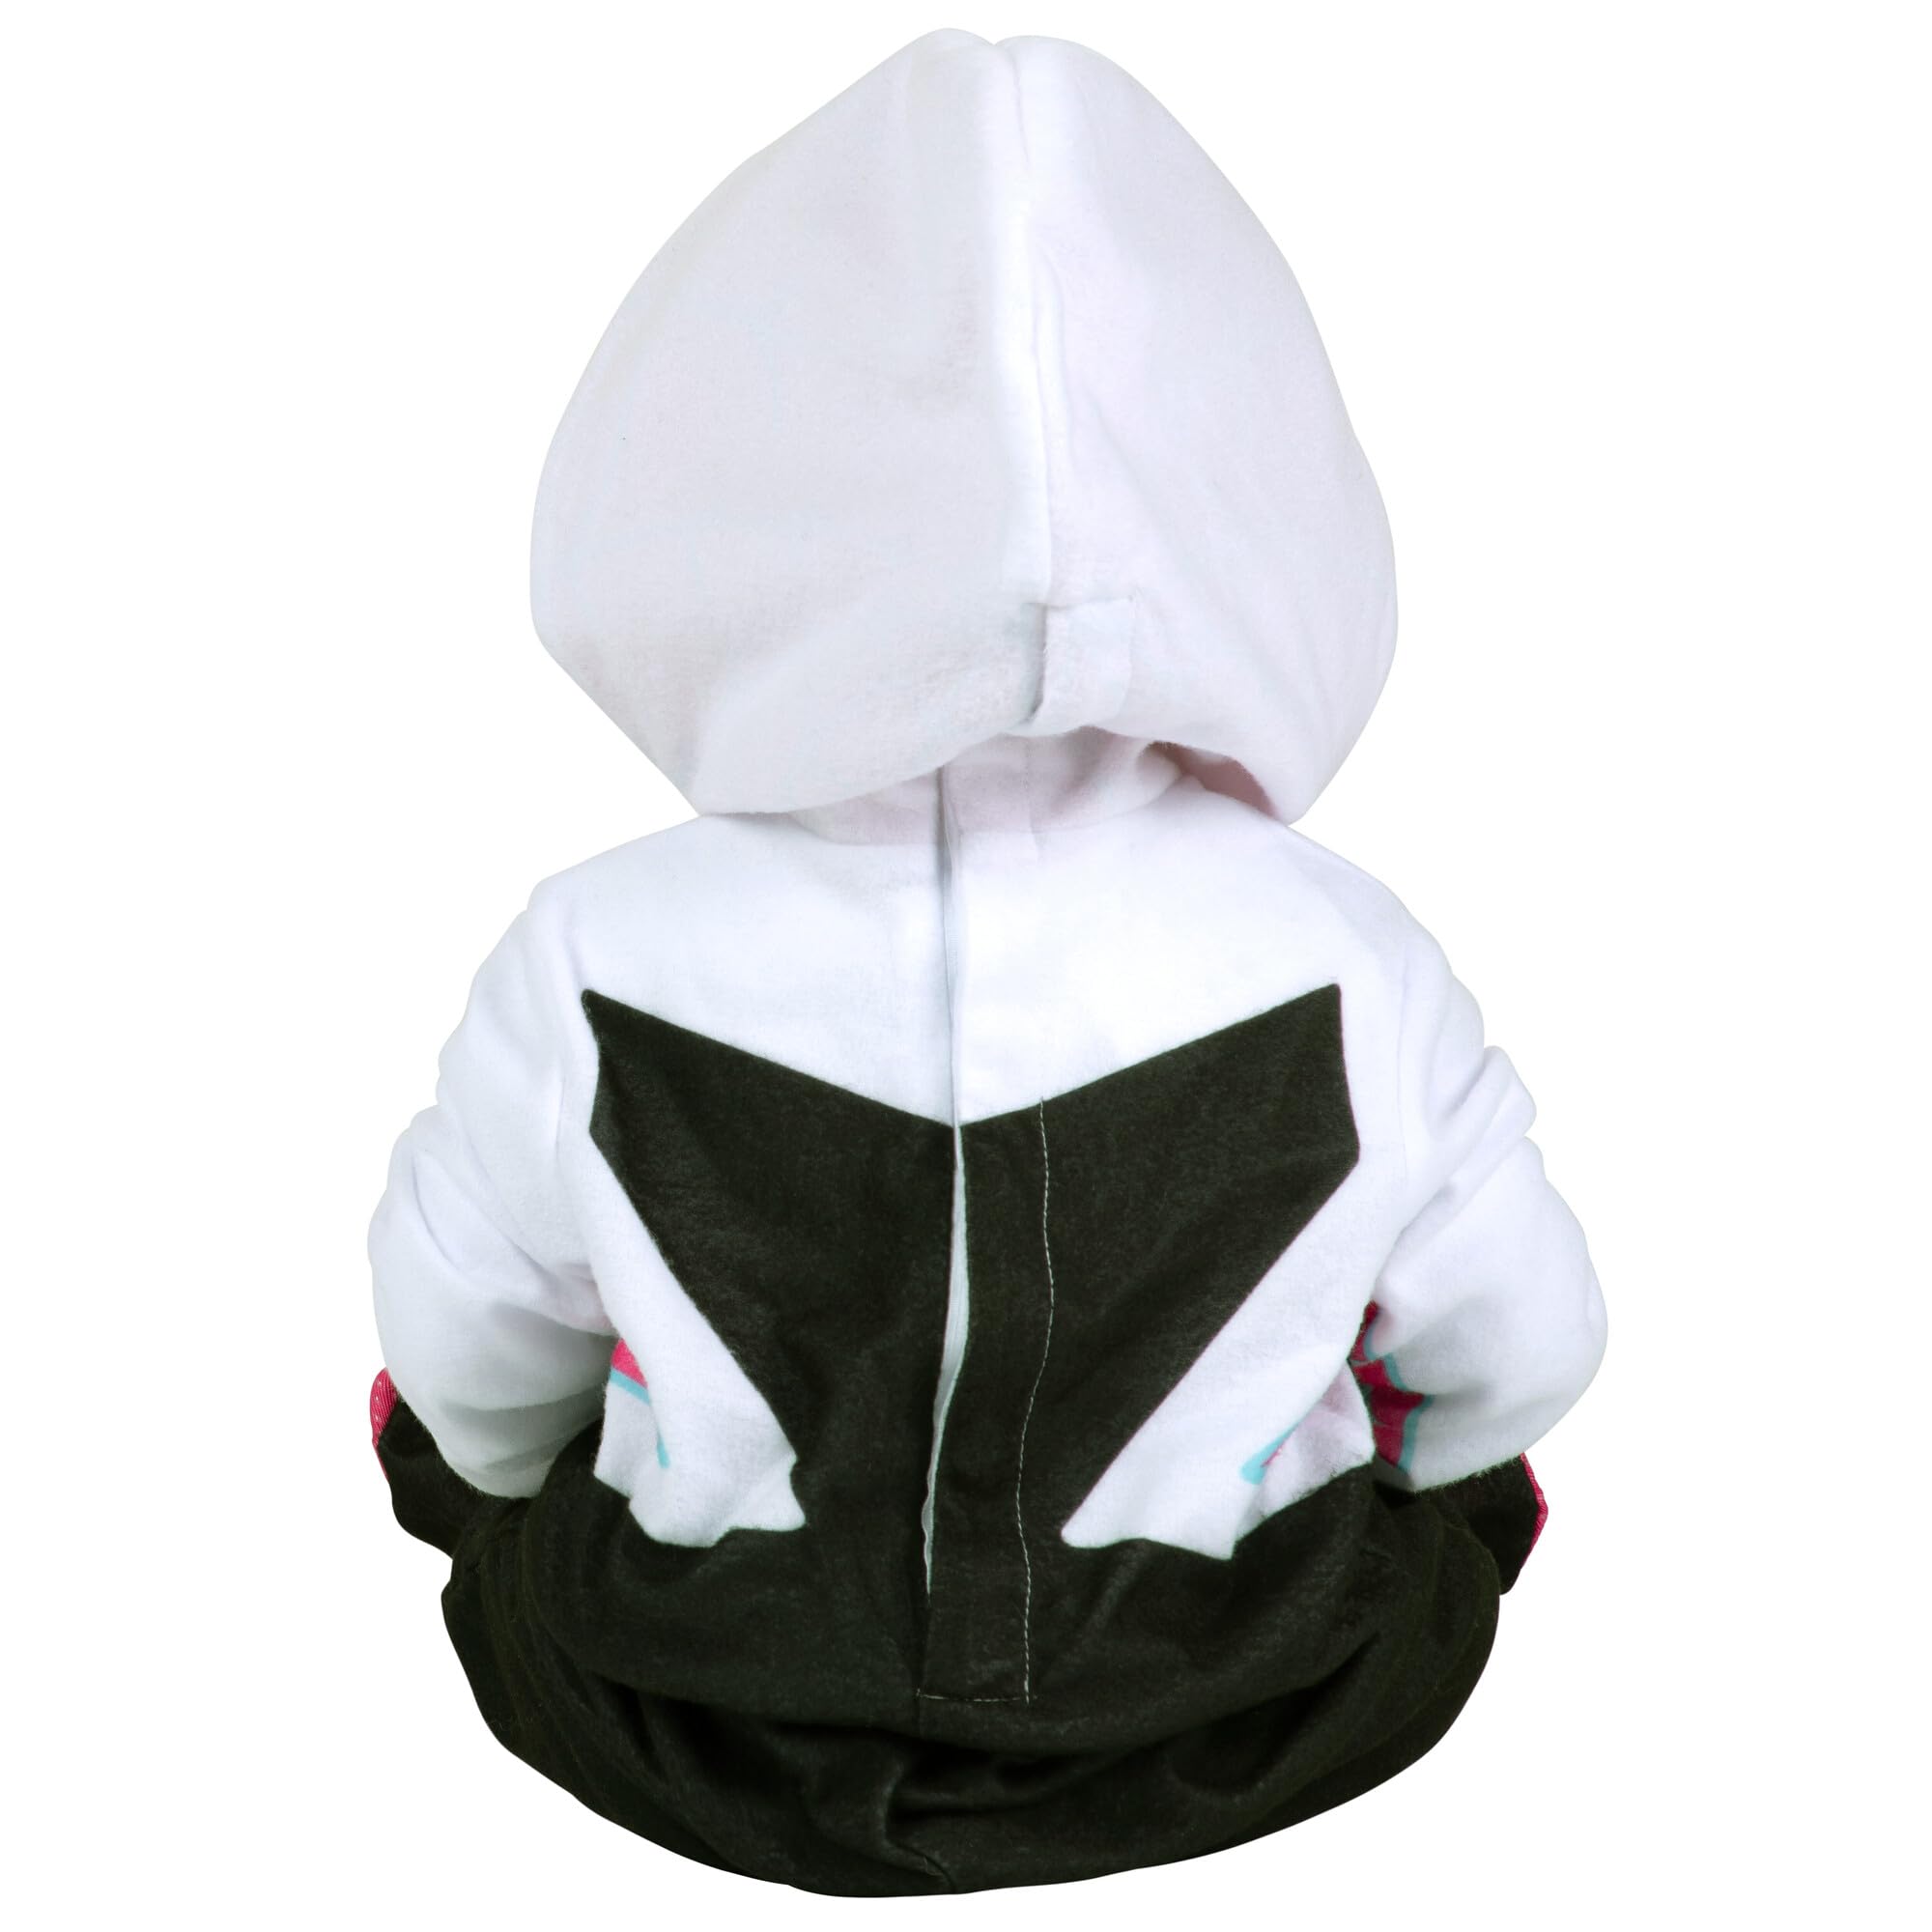 MARVEL Spider-Gwen Official Infant Deluxe Costume - Premium Quality Minky Fabric and Non-Slip Grip Booties 6/12 Months